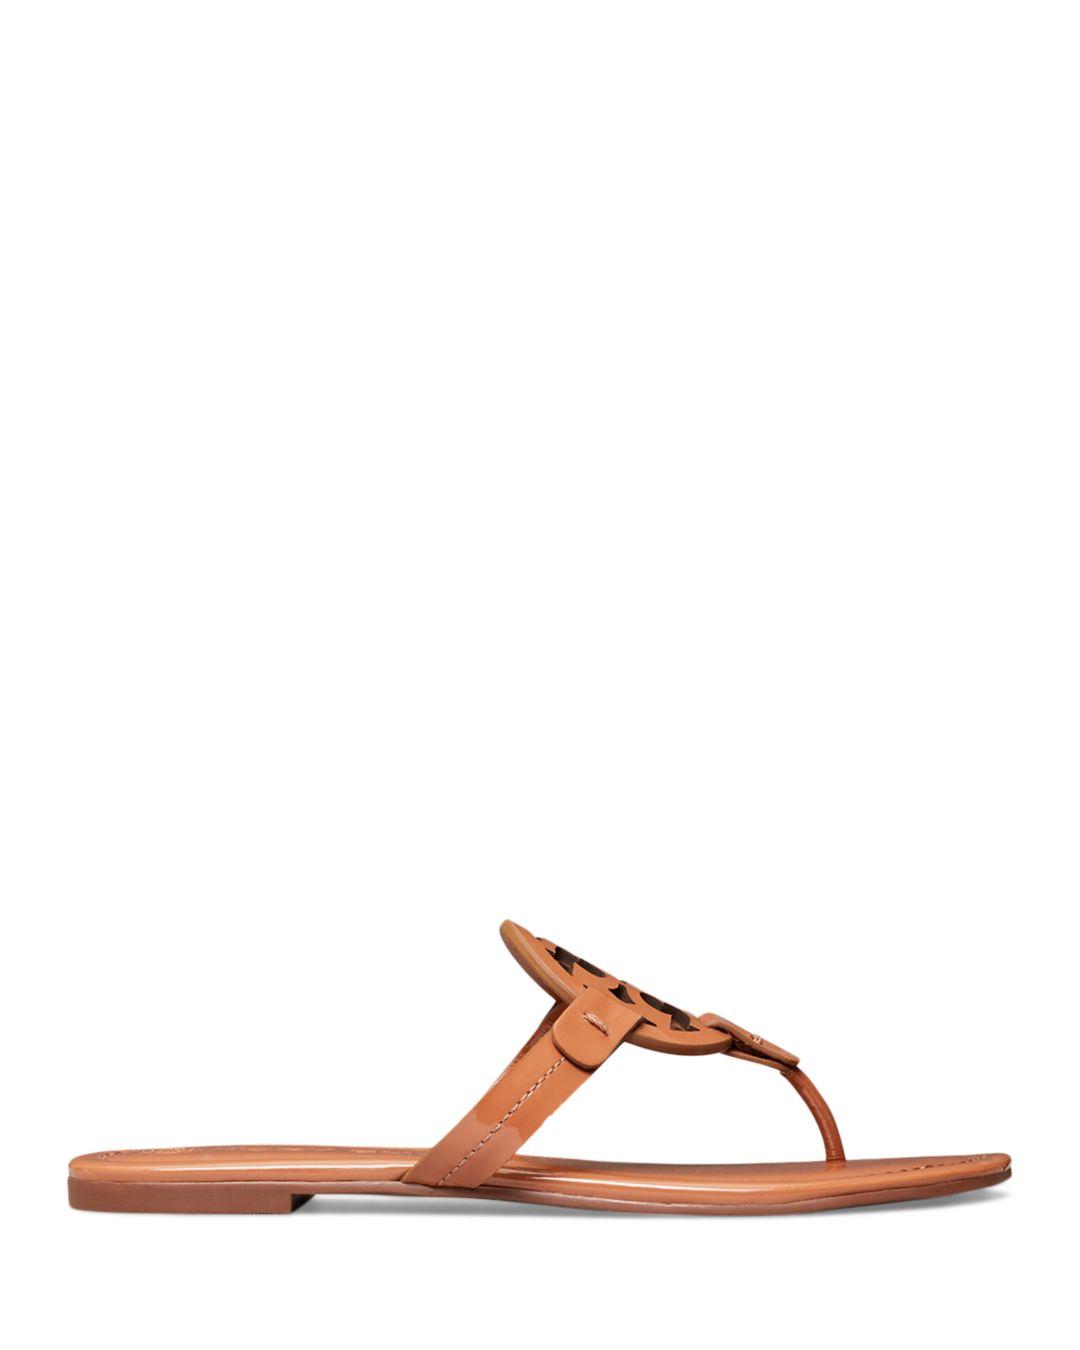 Tory Burch Miller Thong Sandals in Brown | Lyst